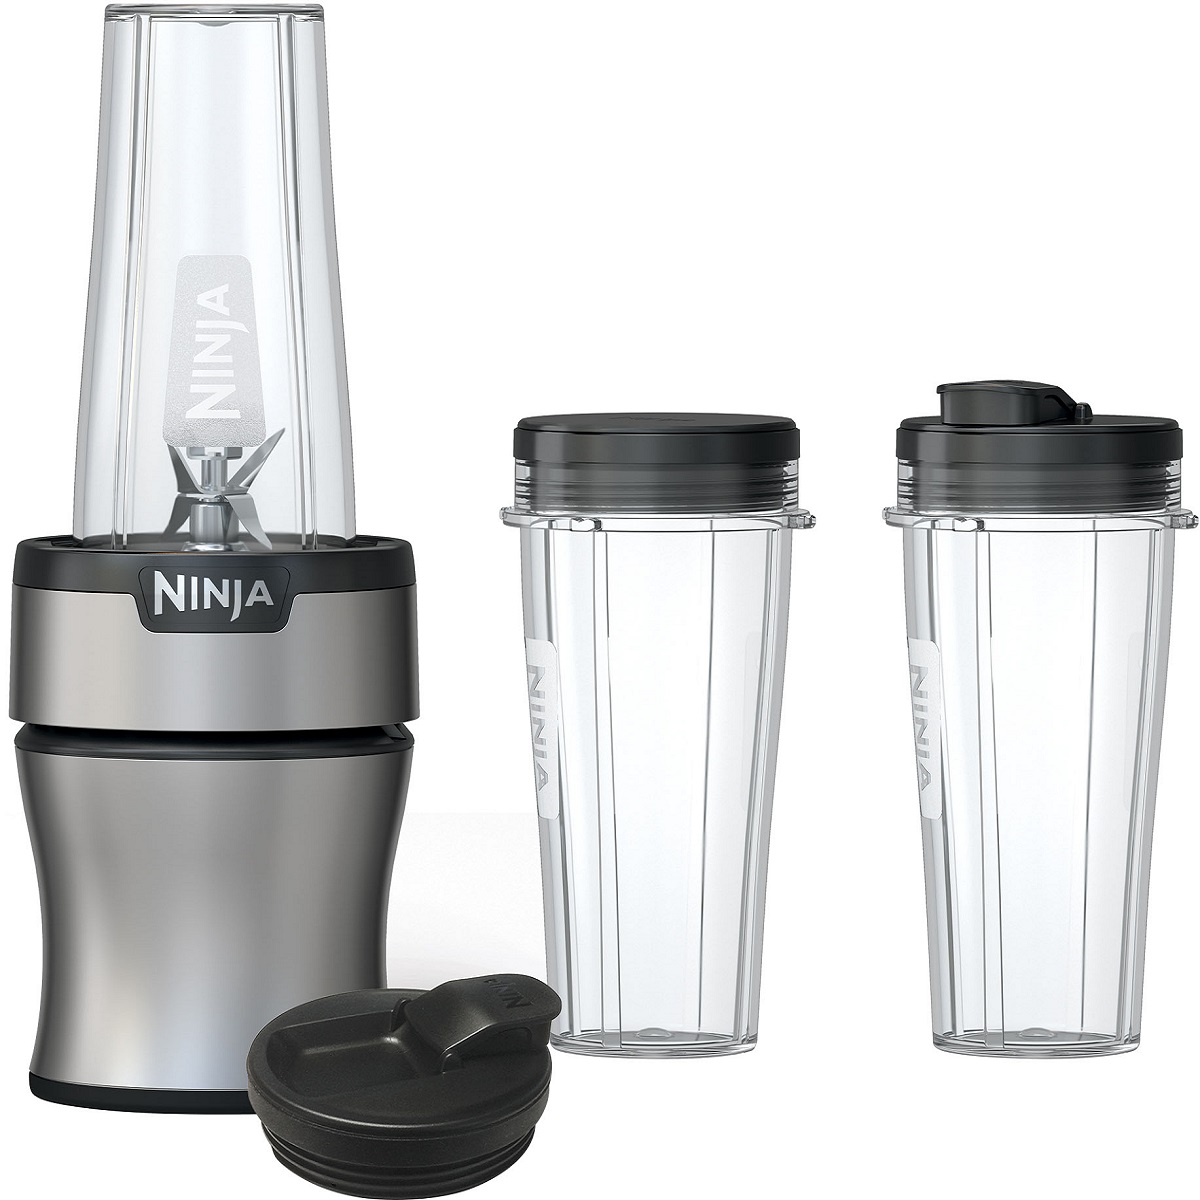  Anbige Replacement Parts for Ninja Blender, 16oz Cup